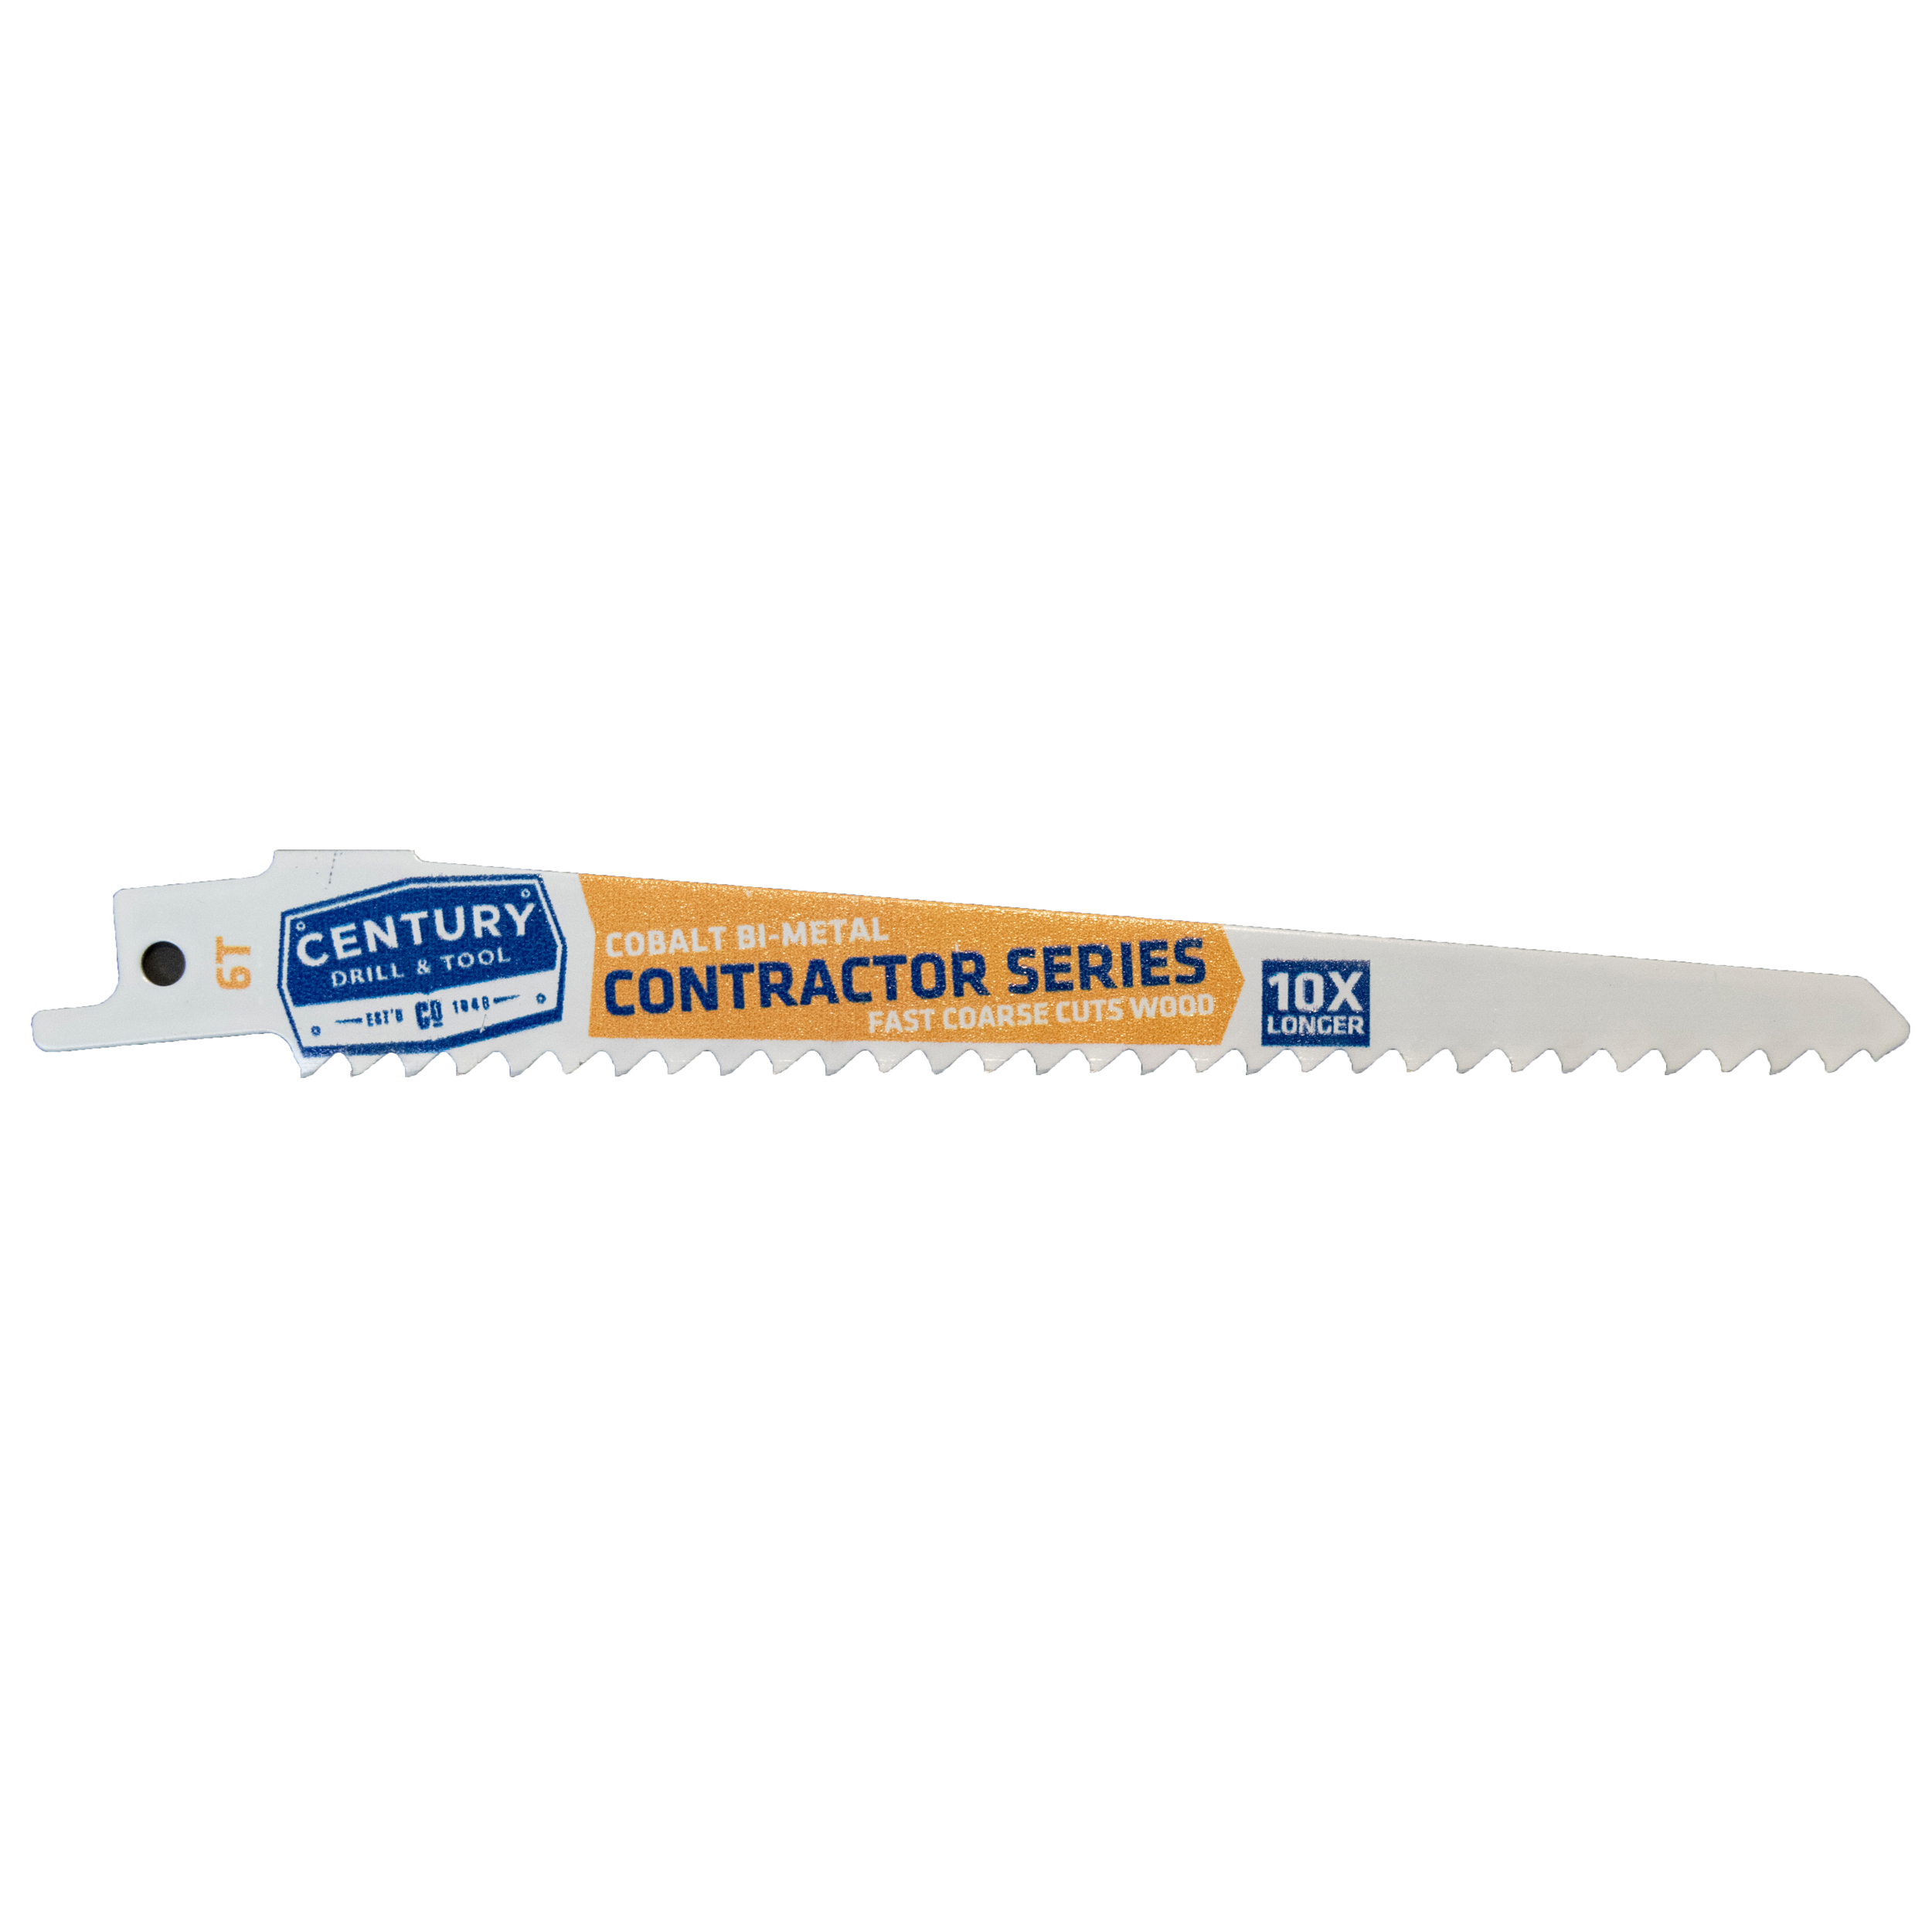 Contractor Series Reciprocating Saw Blade 6T x 6″